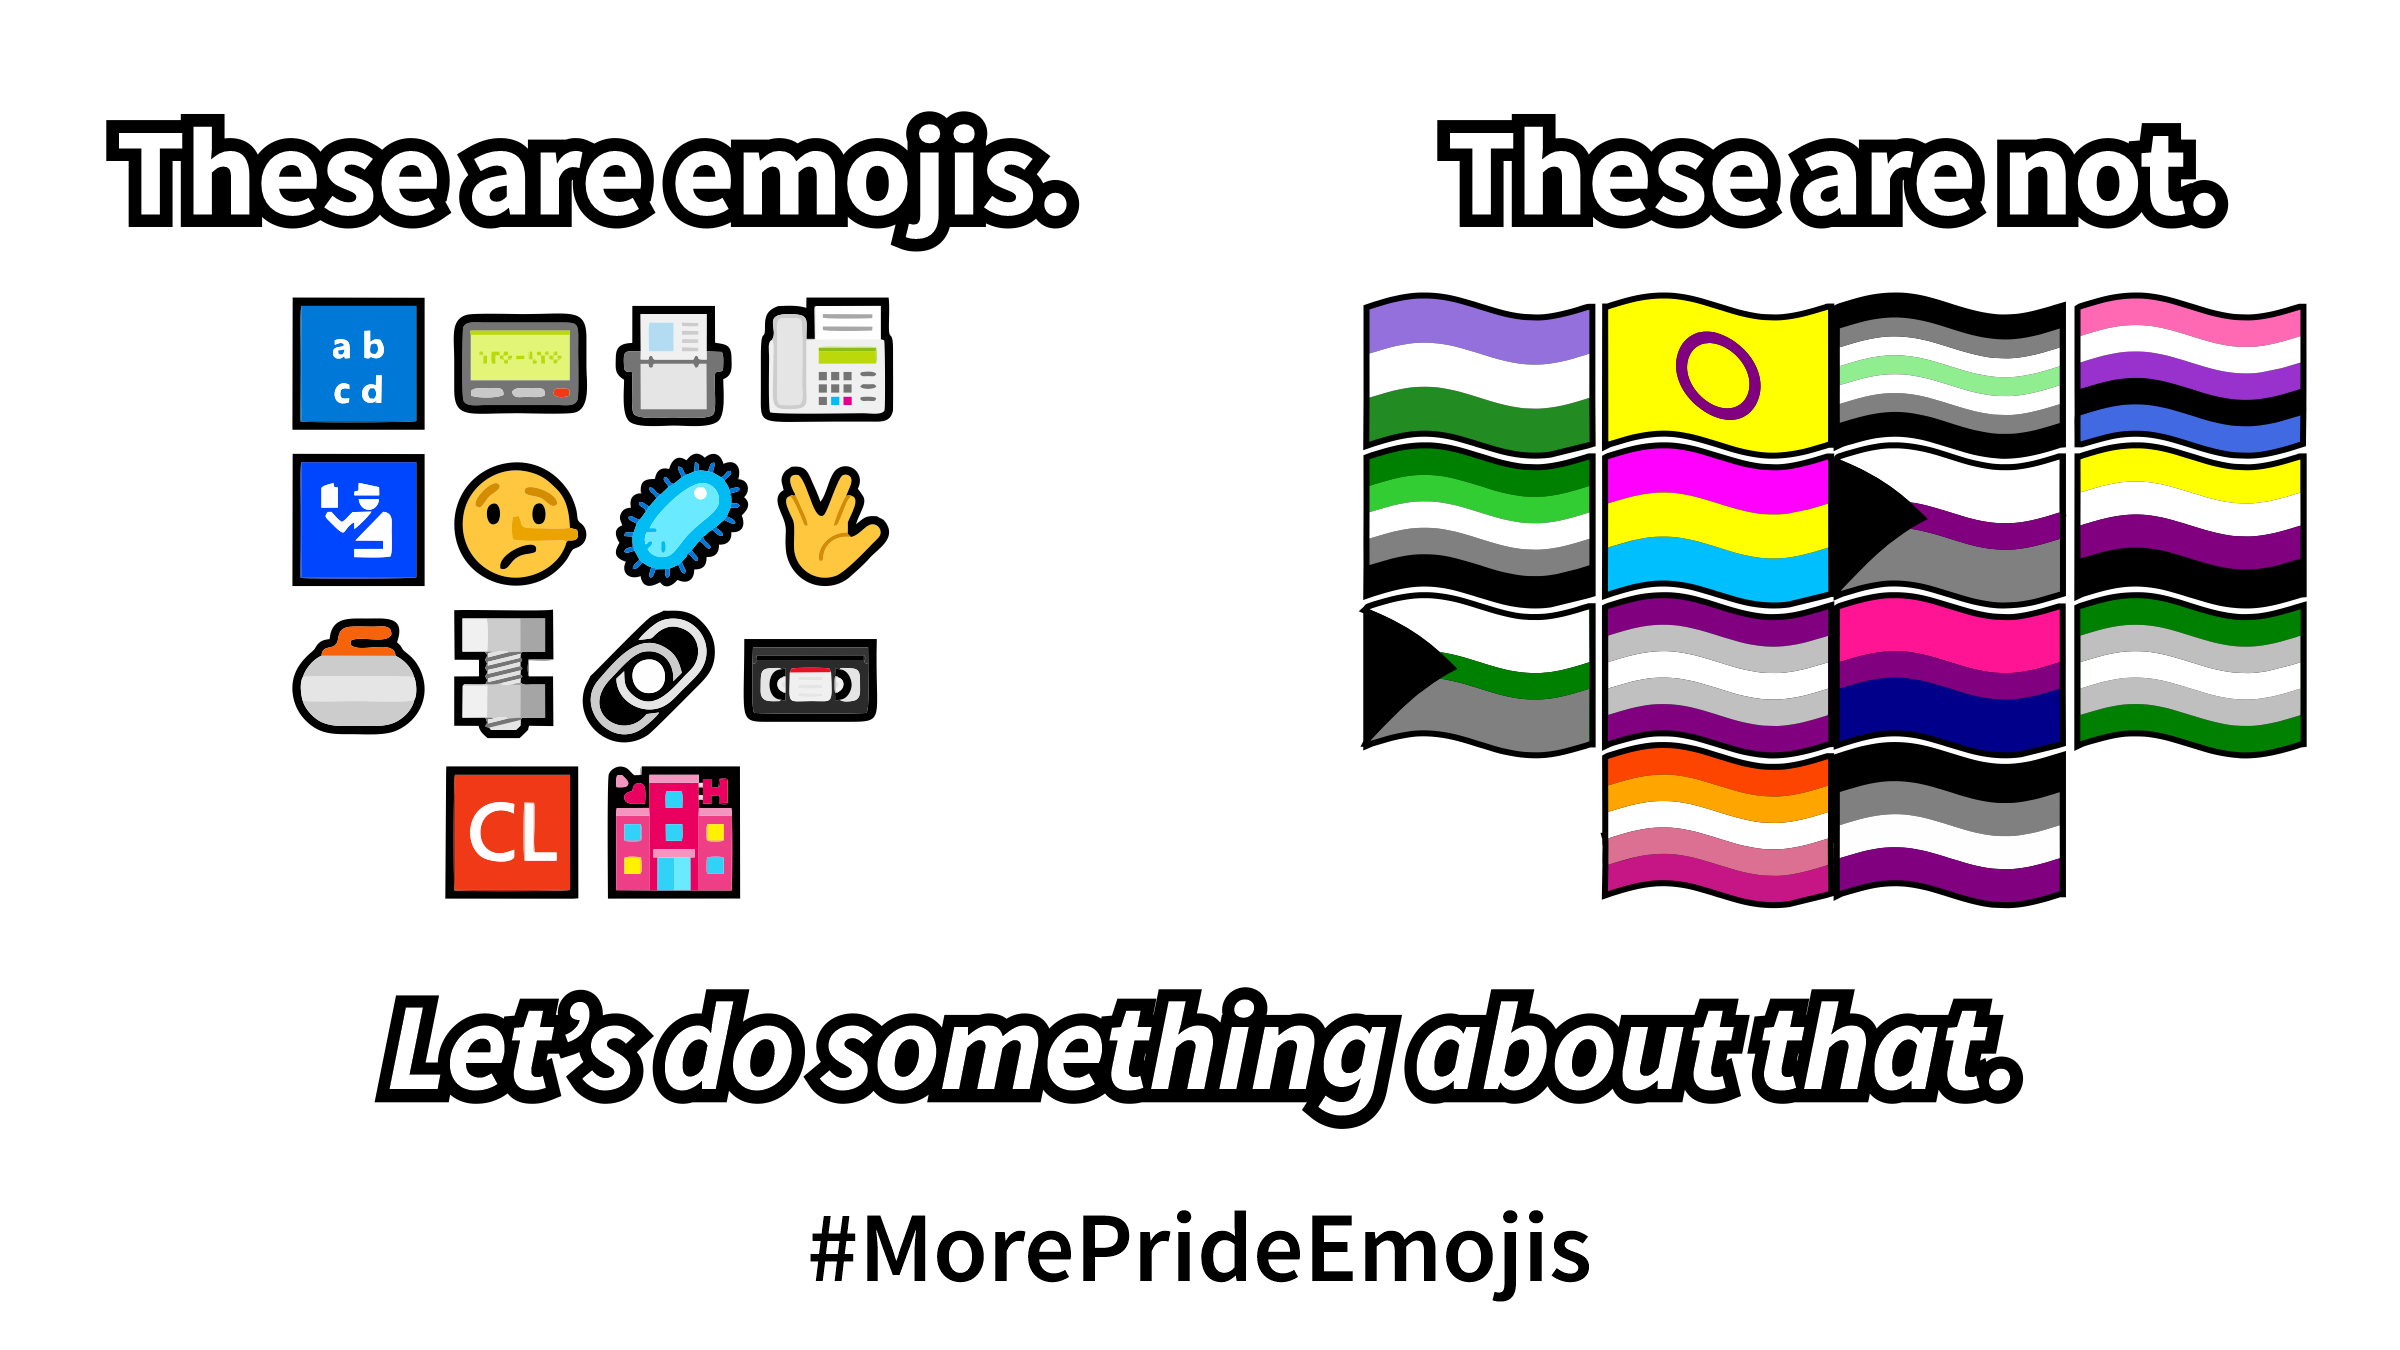 Comparing existing emoji to pride flags